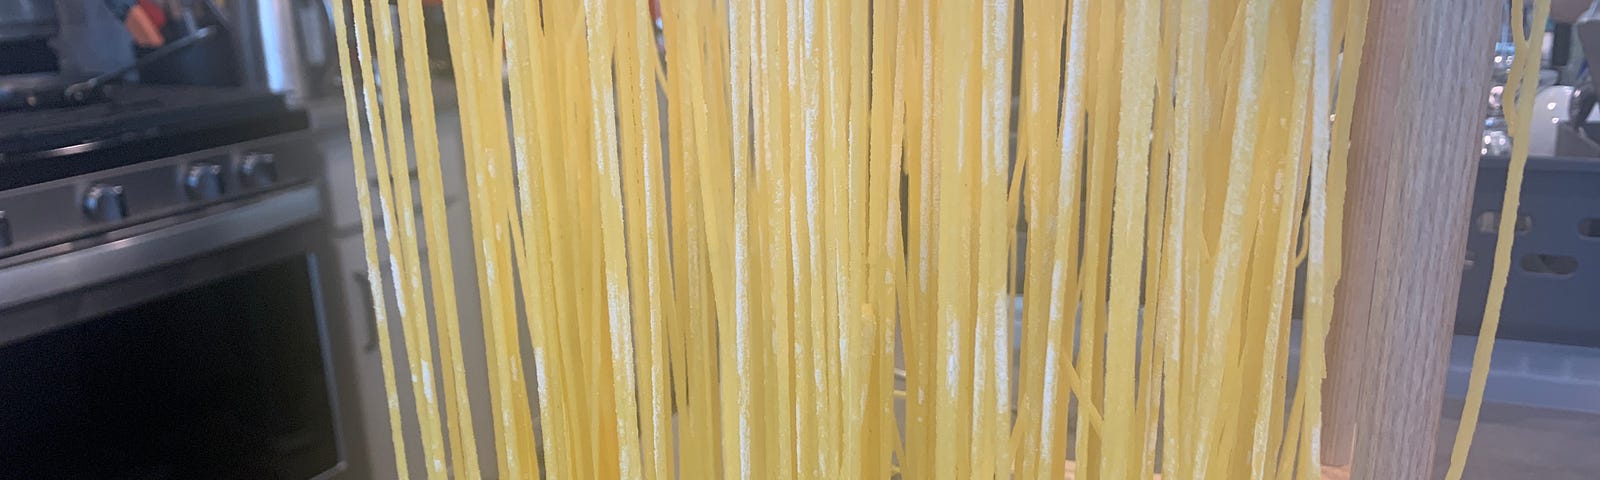 Homemade pasta hanging on a wooden drying rack in a kitchen.